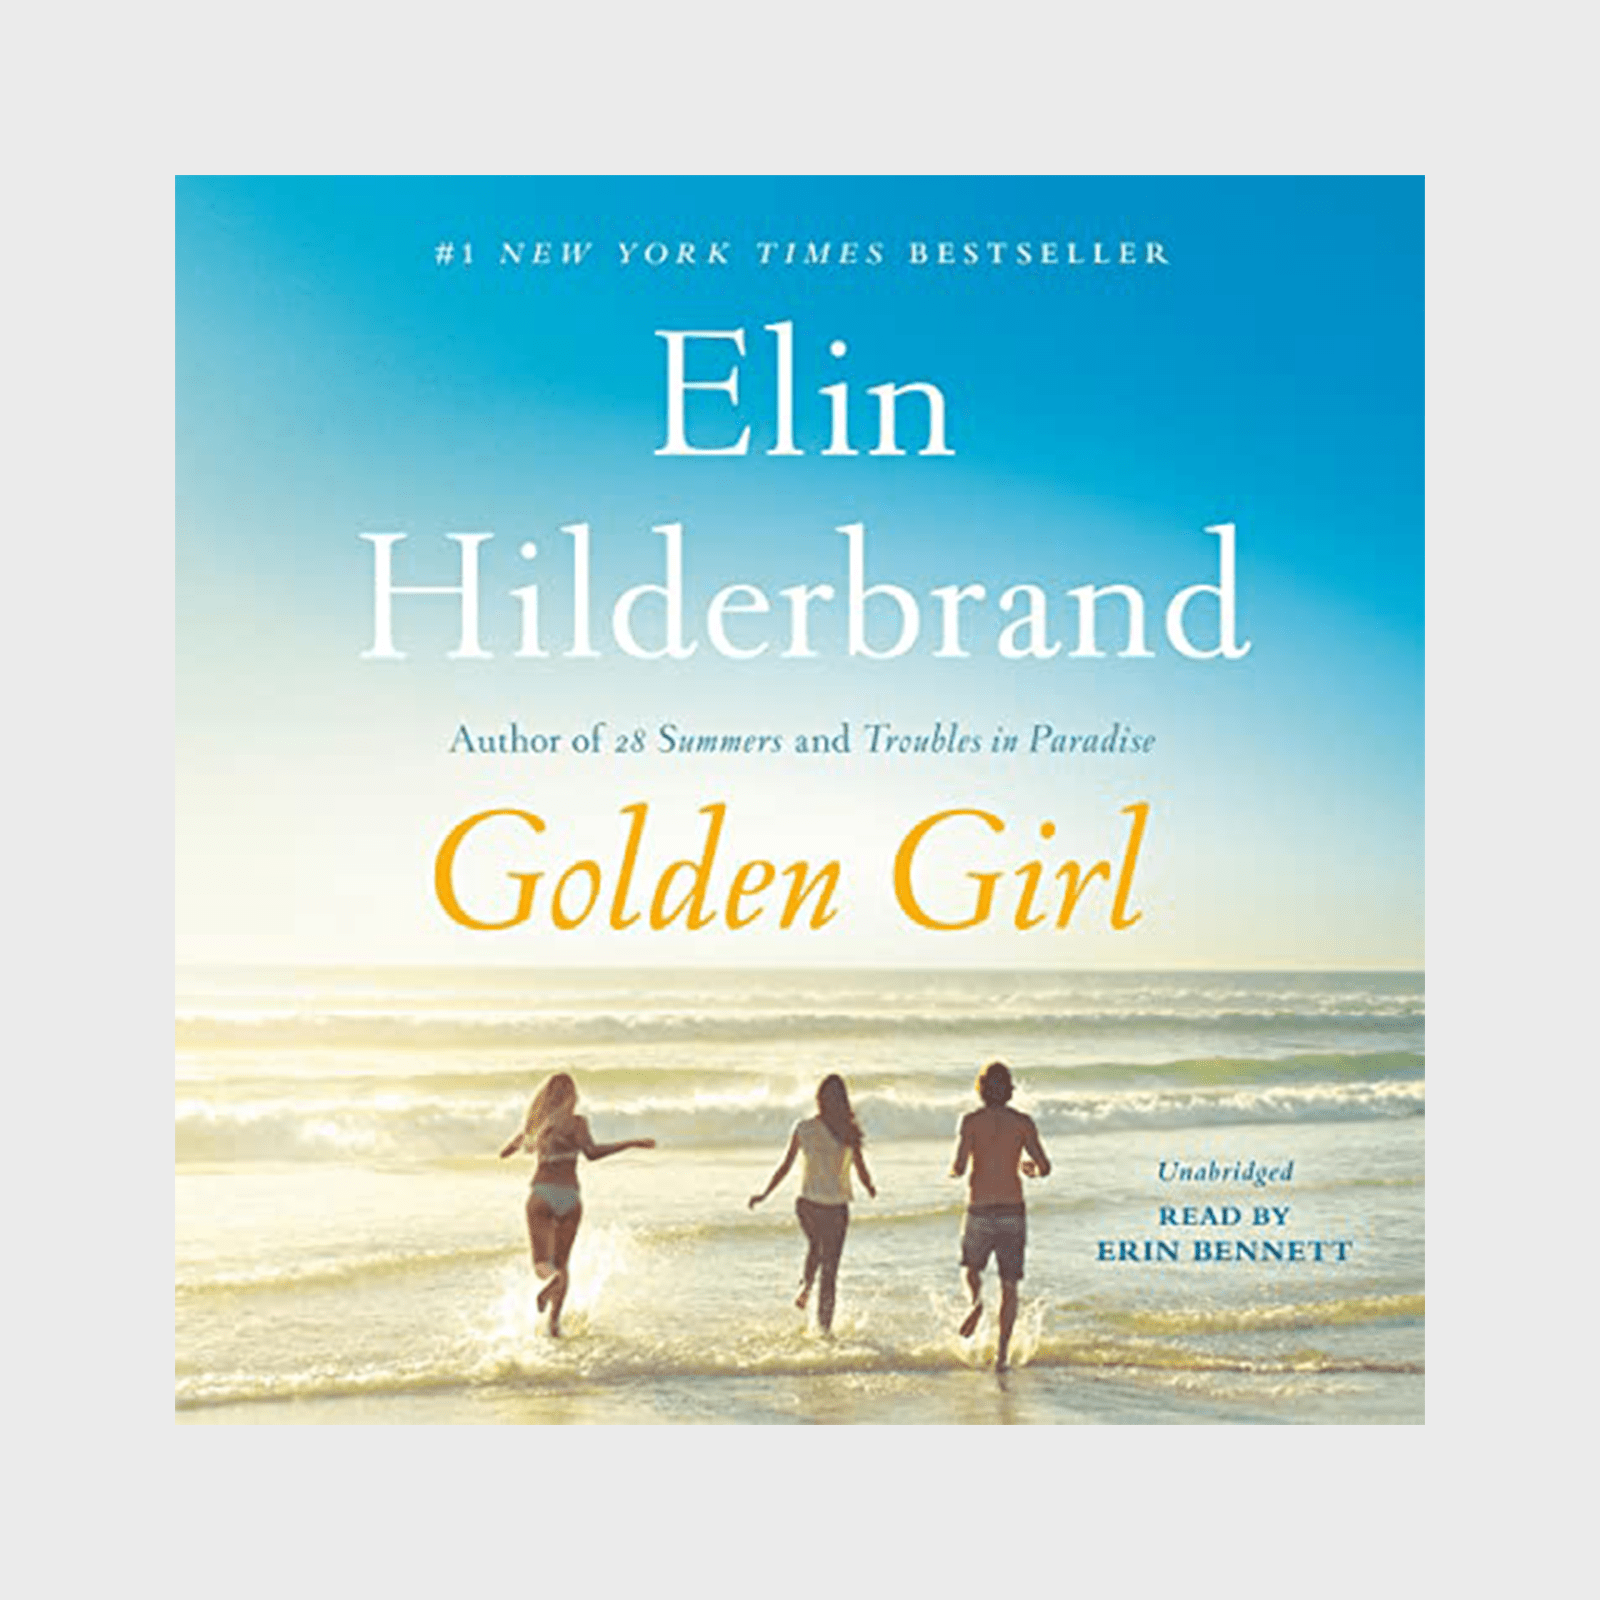 <h3 class=""><strong><em>Golden Girl</em> by Elin Hilderbrand</strong></h3> <p>Is summer even summer without an Elin Hilderbrand book? In her novel <em><a href="https://www.amazon.com/Golden-Girl/dp/B08YLK6W85/" rel="noopener noreferrer">Golden Girl</a>,</em> Nantucket author Vivian Howe is killed in a hit-and-run accident while out jogging. In the afterlife, Vivi is assigned to another woman, Martha, who allows her to watch over her loved ones for one last summer. She is also given three "nudges," which she can use to help guide her three children as they begin to navigate life without her. But it's hard for Vivi to find peace as she learns about the struggles her children have kept hidden from her and worries about one of her own hidden truths coming to light. Lying on a towel with your audiobooks playing is heavenly, so remember to line up your <a href="https://www.rd.com/list/beach-reads/" rel="noopener noreferrer">beach reads</a> in advance!</p> <p class="listicle-page__cta-button-shop"><a class="shop-btn" href="https://www.amazon.com/Golden-Girl/dp/B08YLK6W85/">Shop Now</a></p>